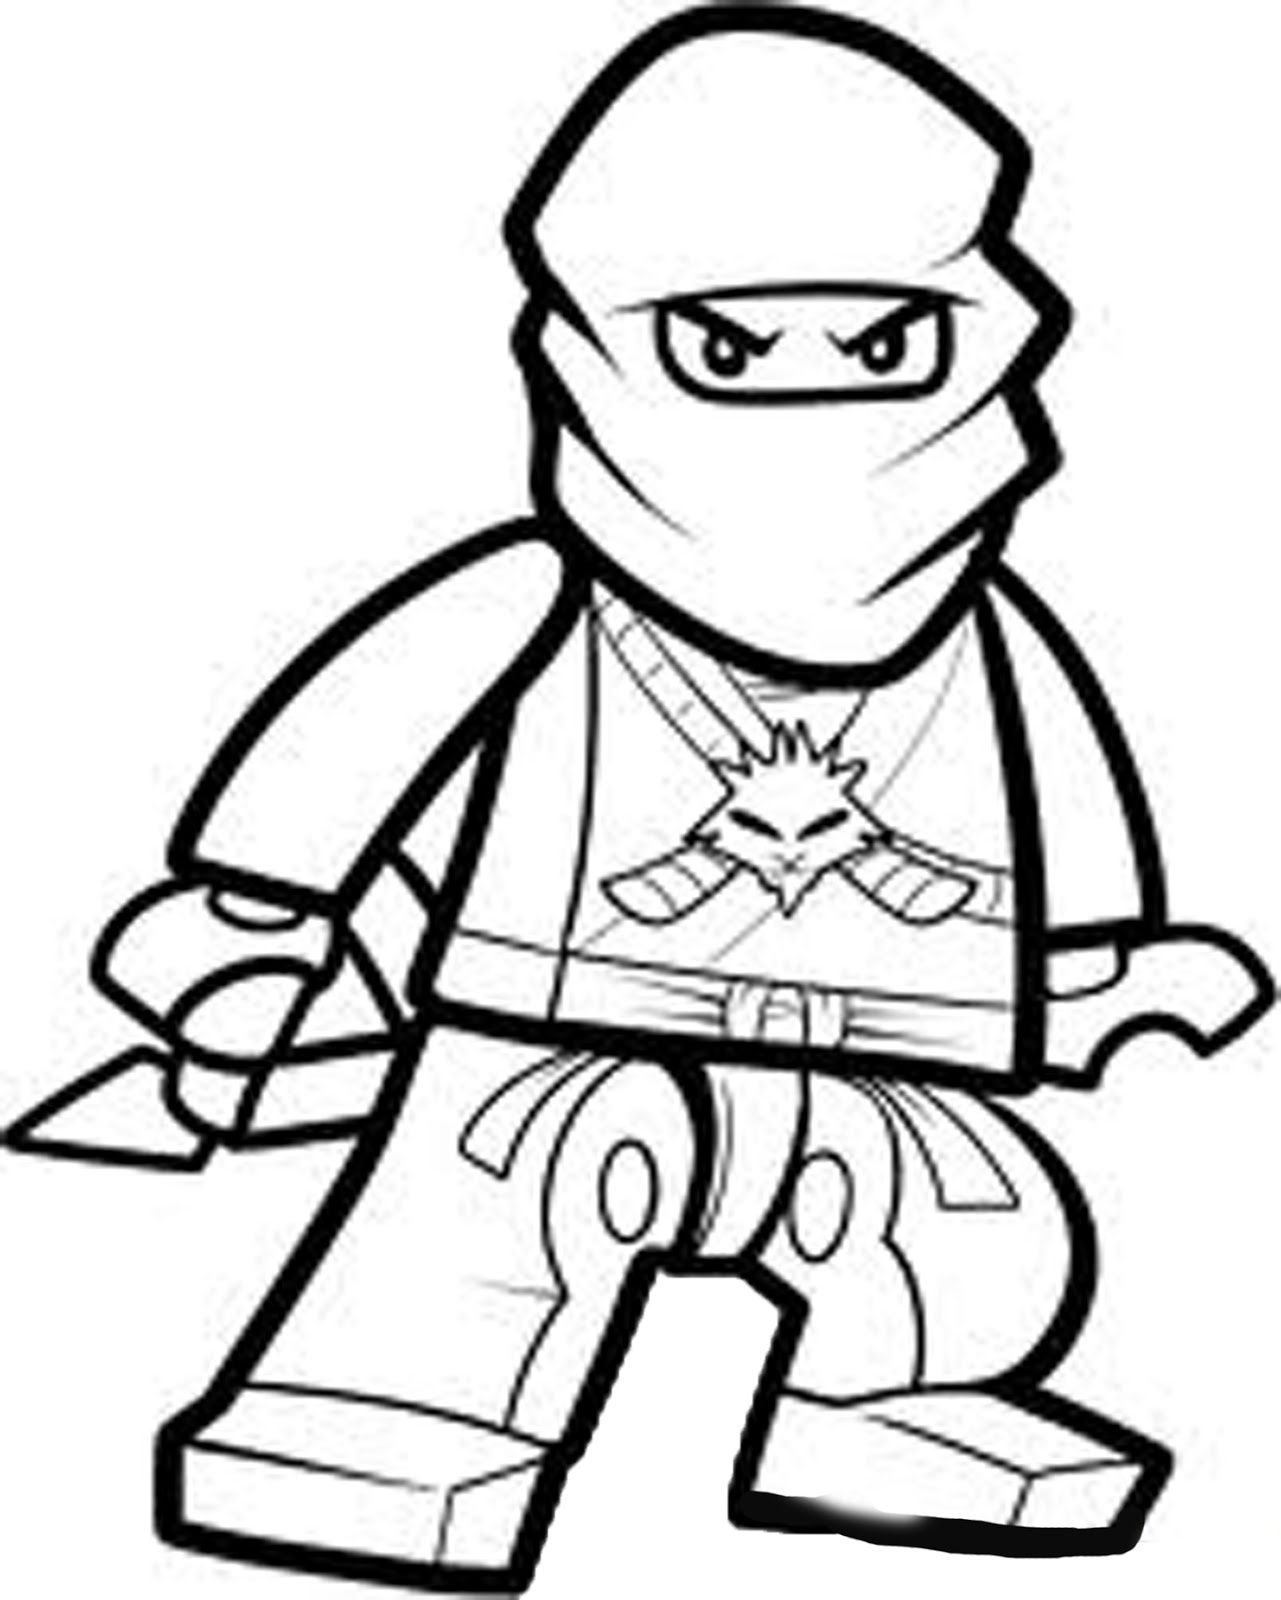 Coloring Pages Online To Print Coloring Ages Coloring Pages Online ...